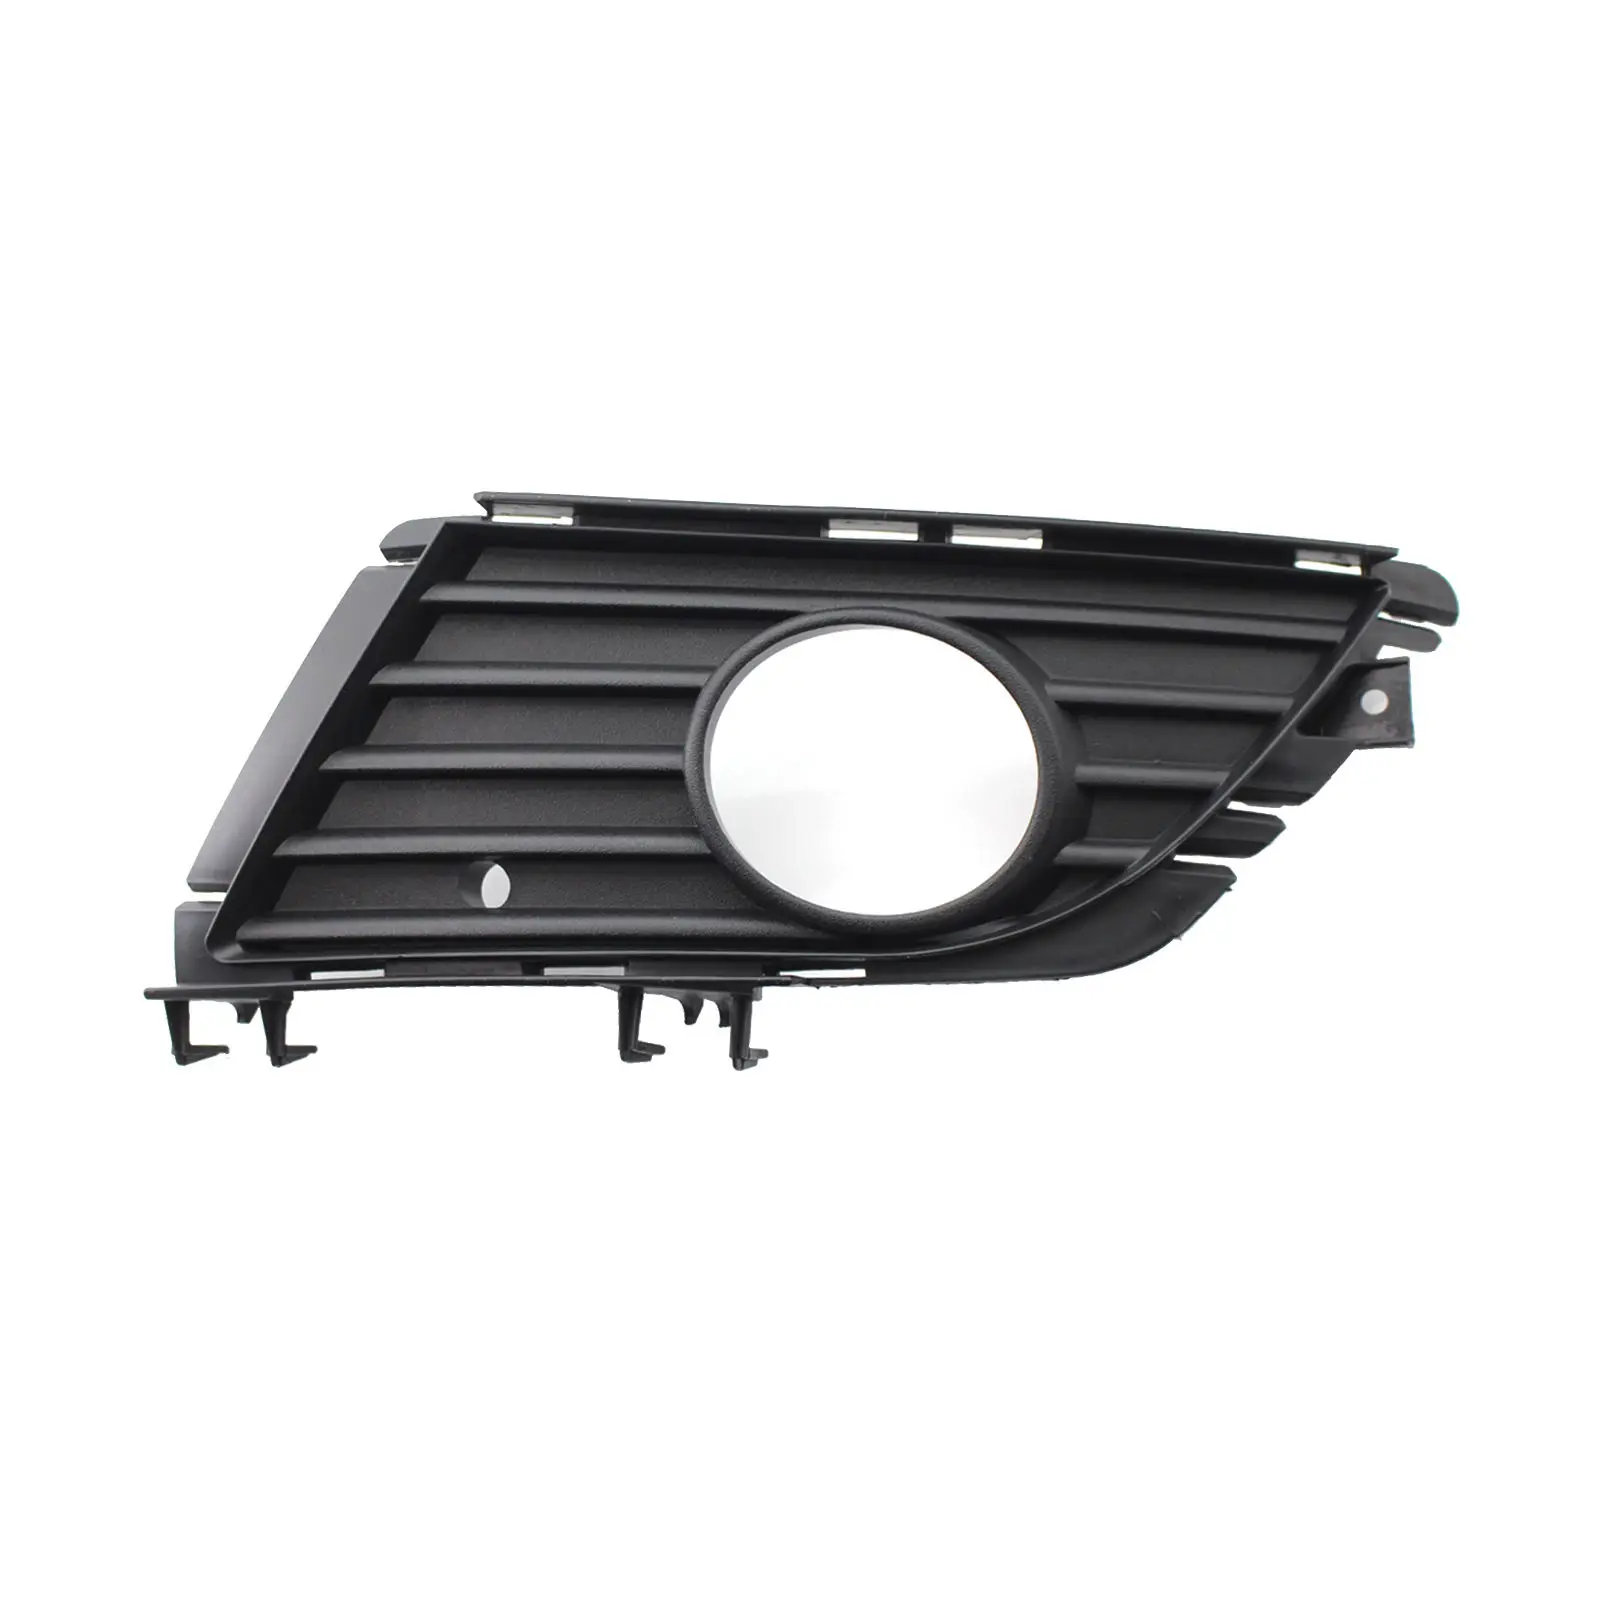 Car Front Bumper Foglight Grille Set For Vauxhall Opel Combo Corsa C MK2 03-06 Fog Light Lamp Covers Grilles Replacements